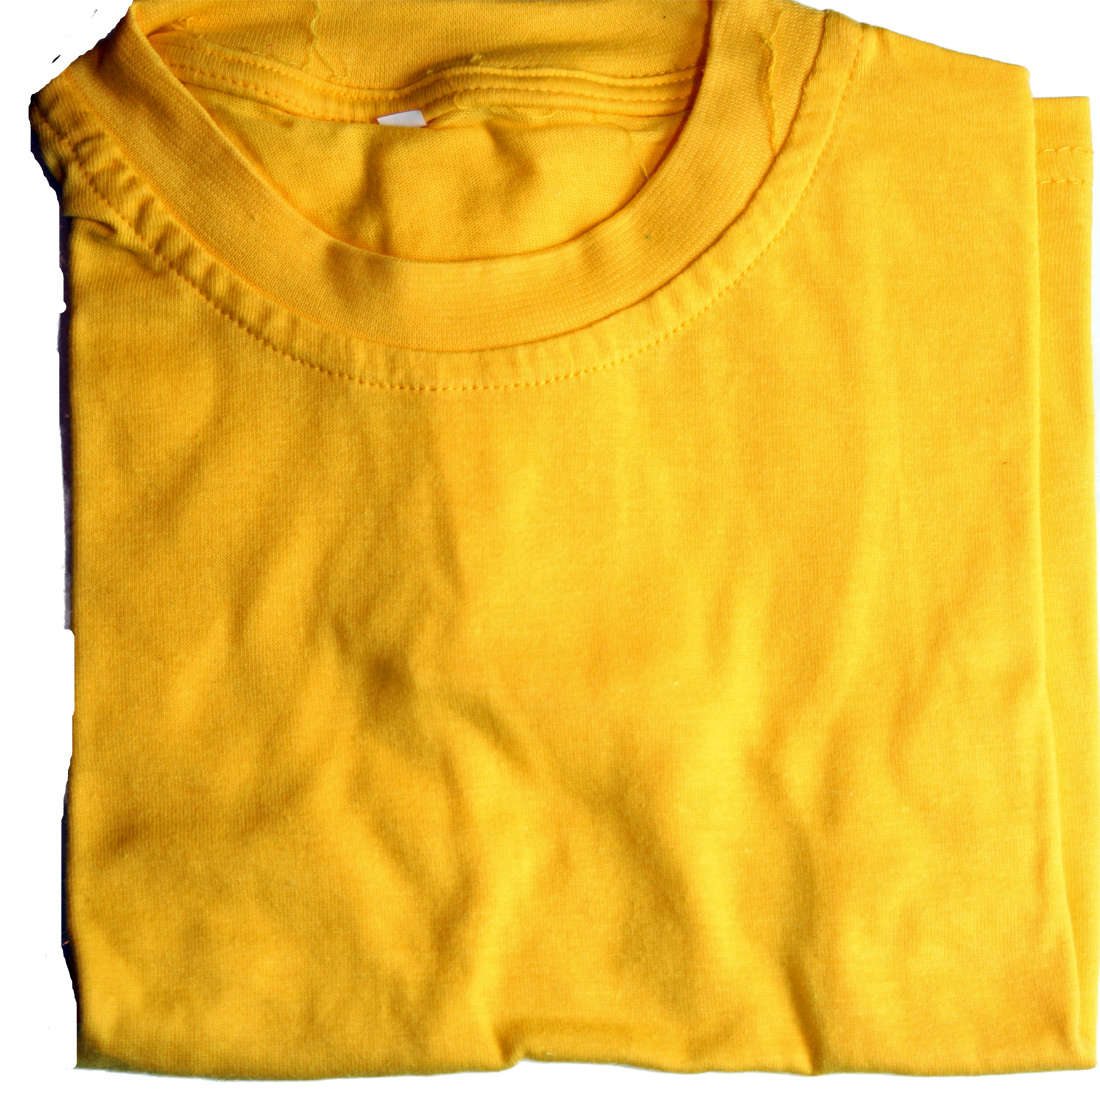 Tee shirt house yellow – Esquires